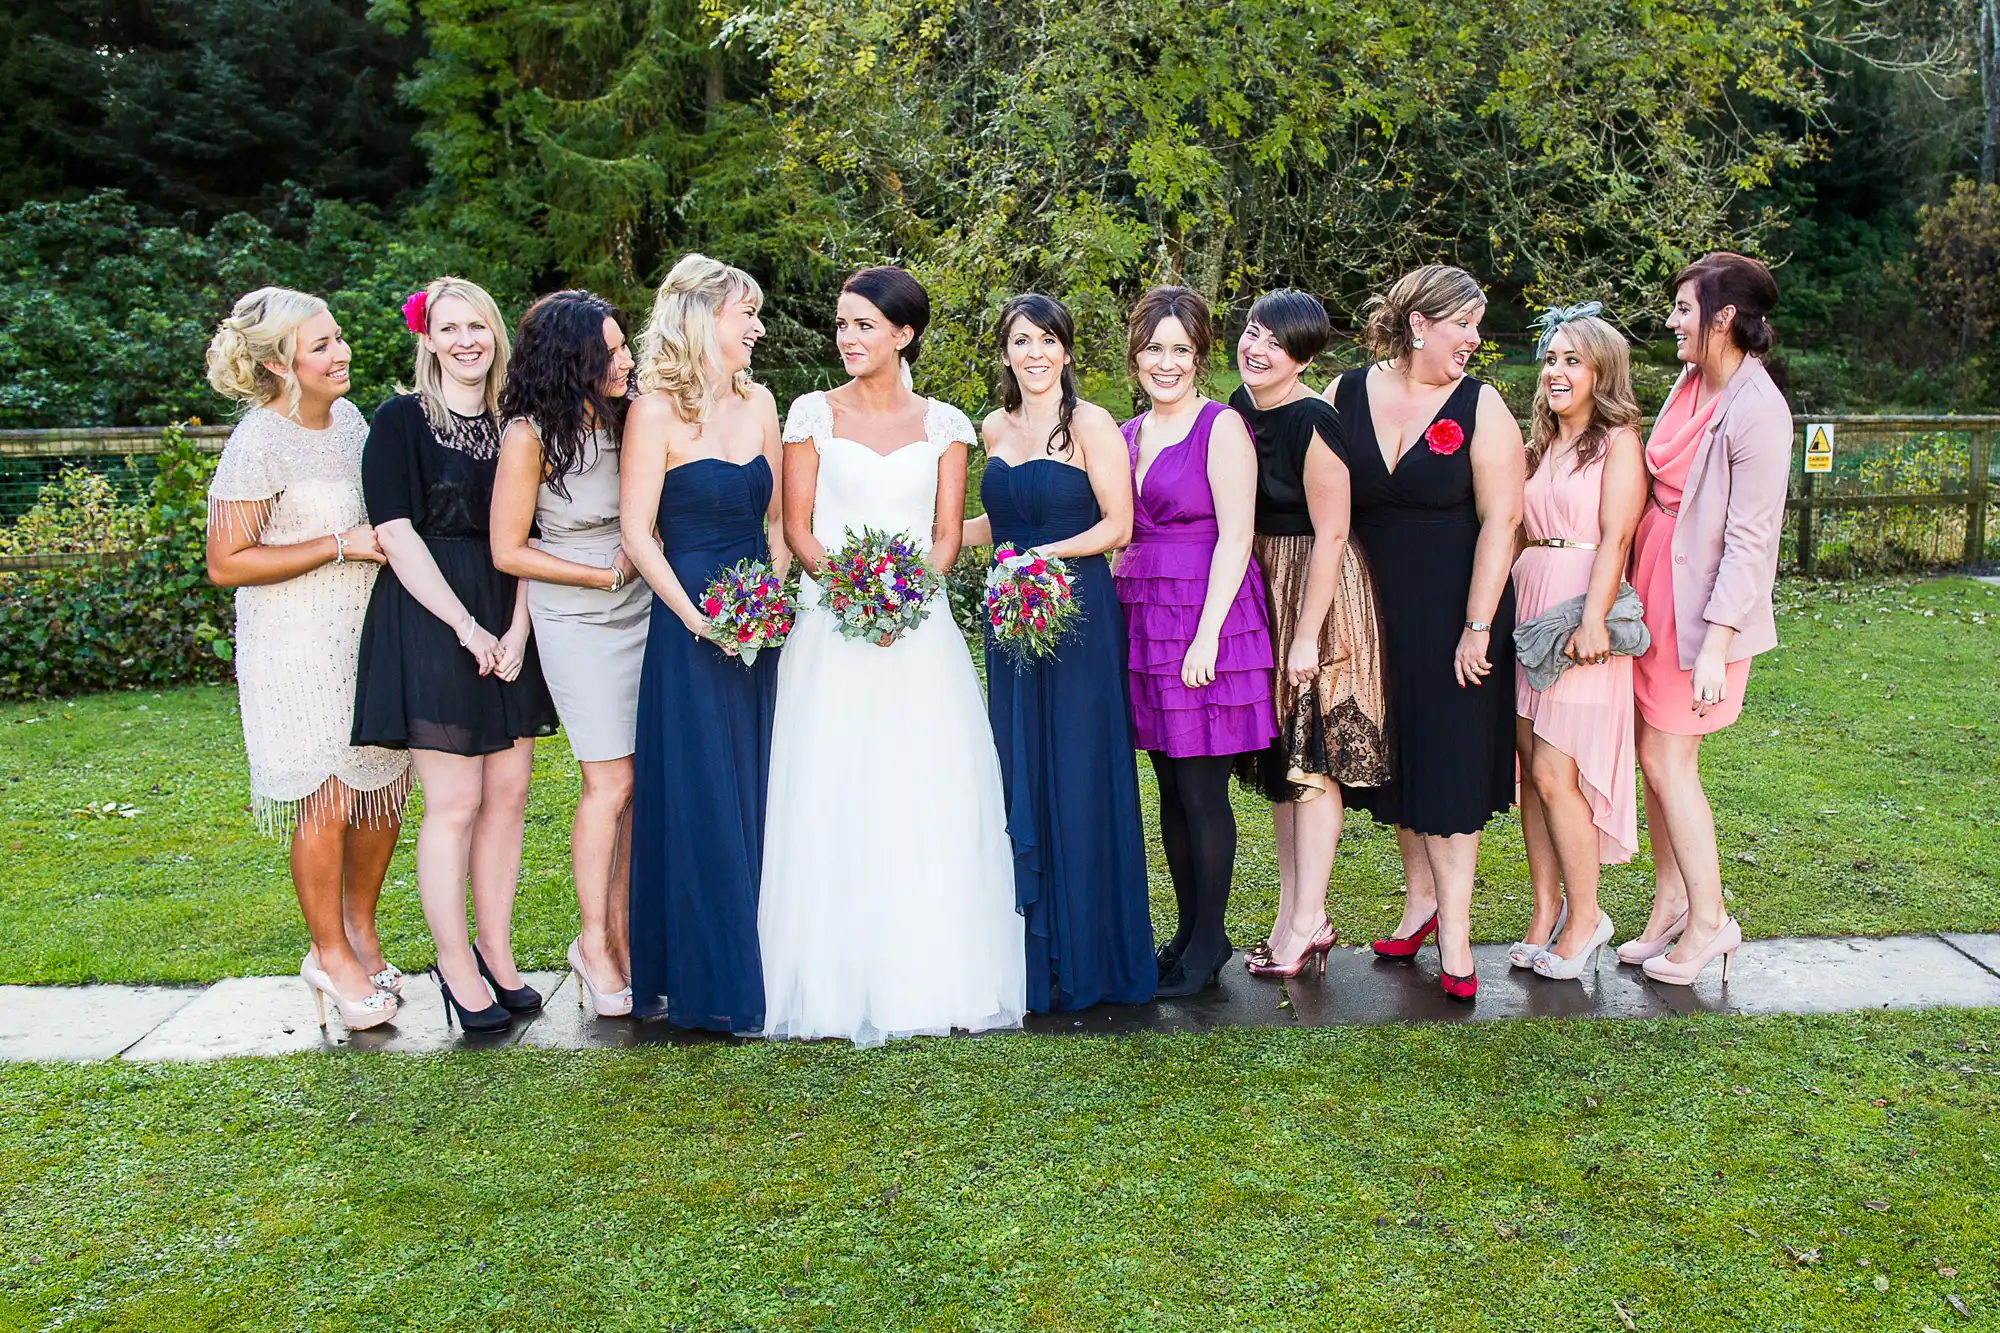 A bride in a white dress stands with nine women in various colored dresses in a garden, all smiling.